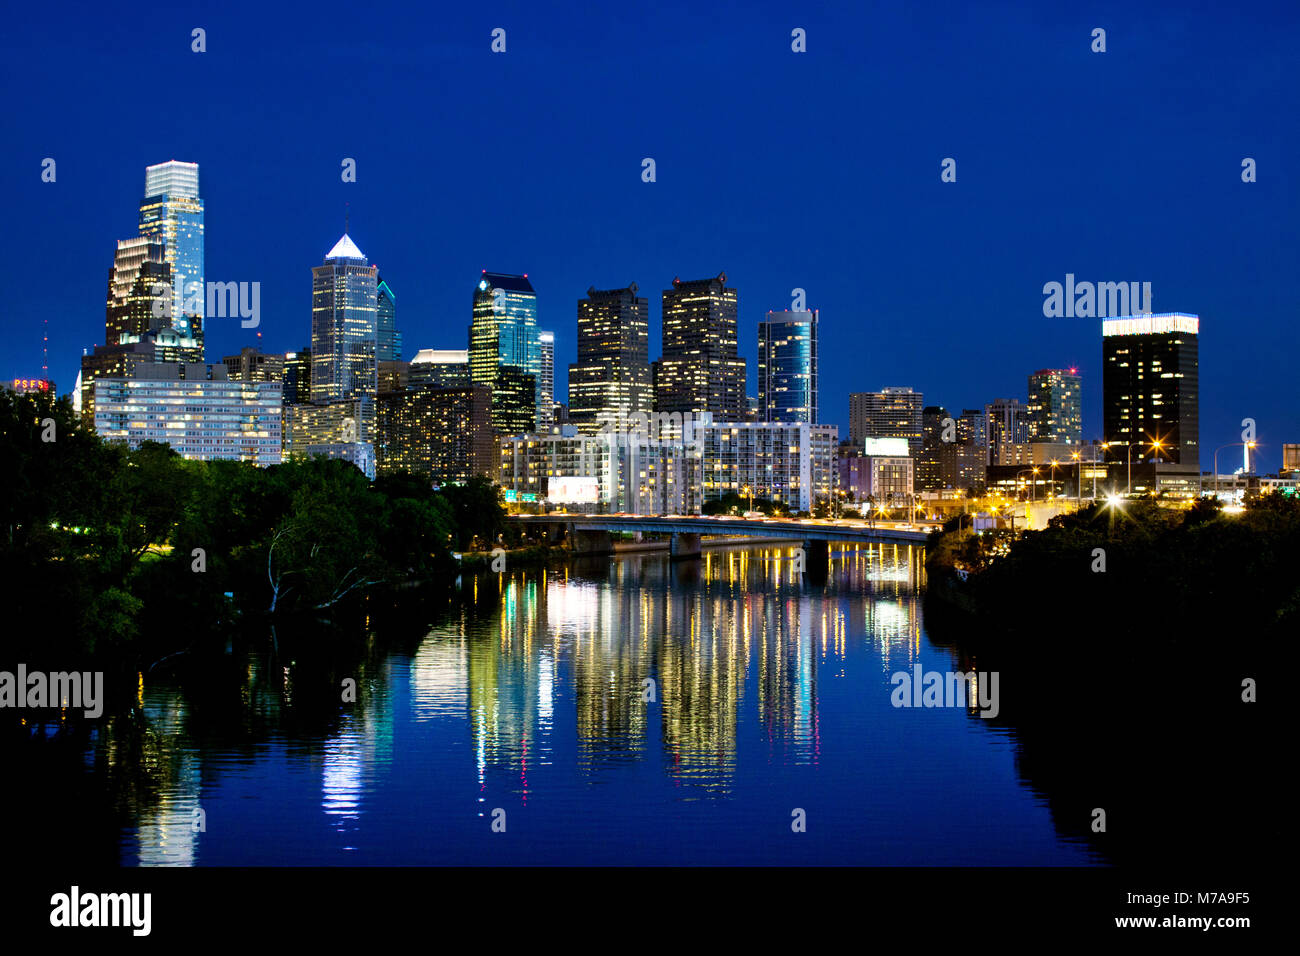 Philadelphia, Pennsylvania, USA skyline at night in black and white with the cities lights reflecting in the water. Stock Photo